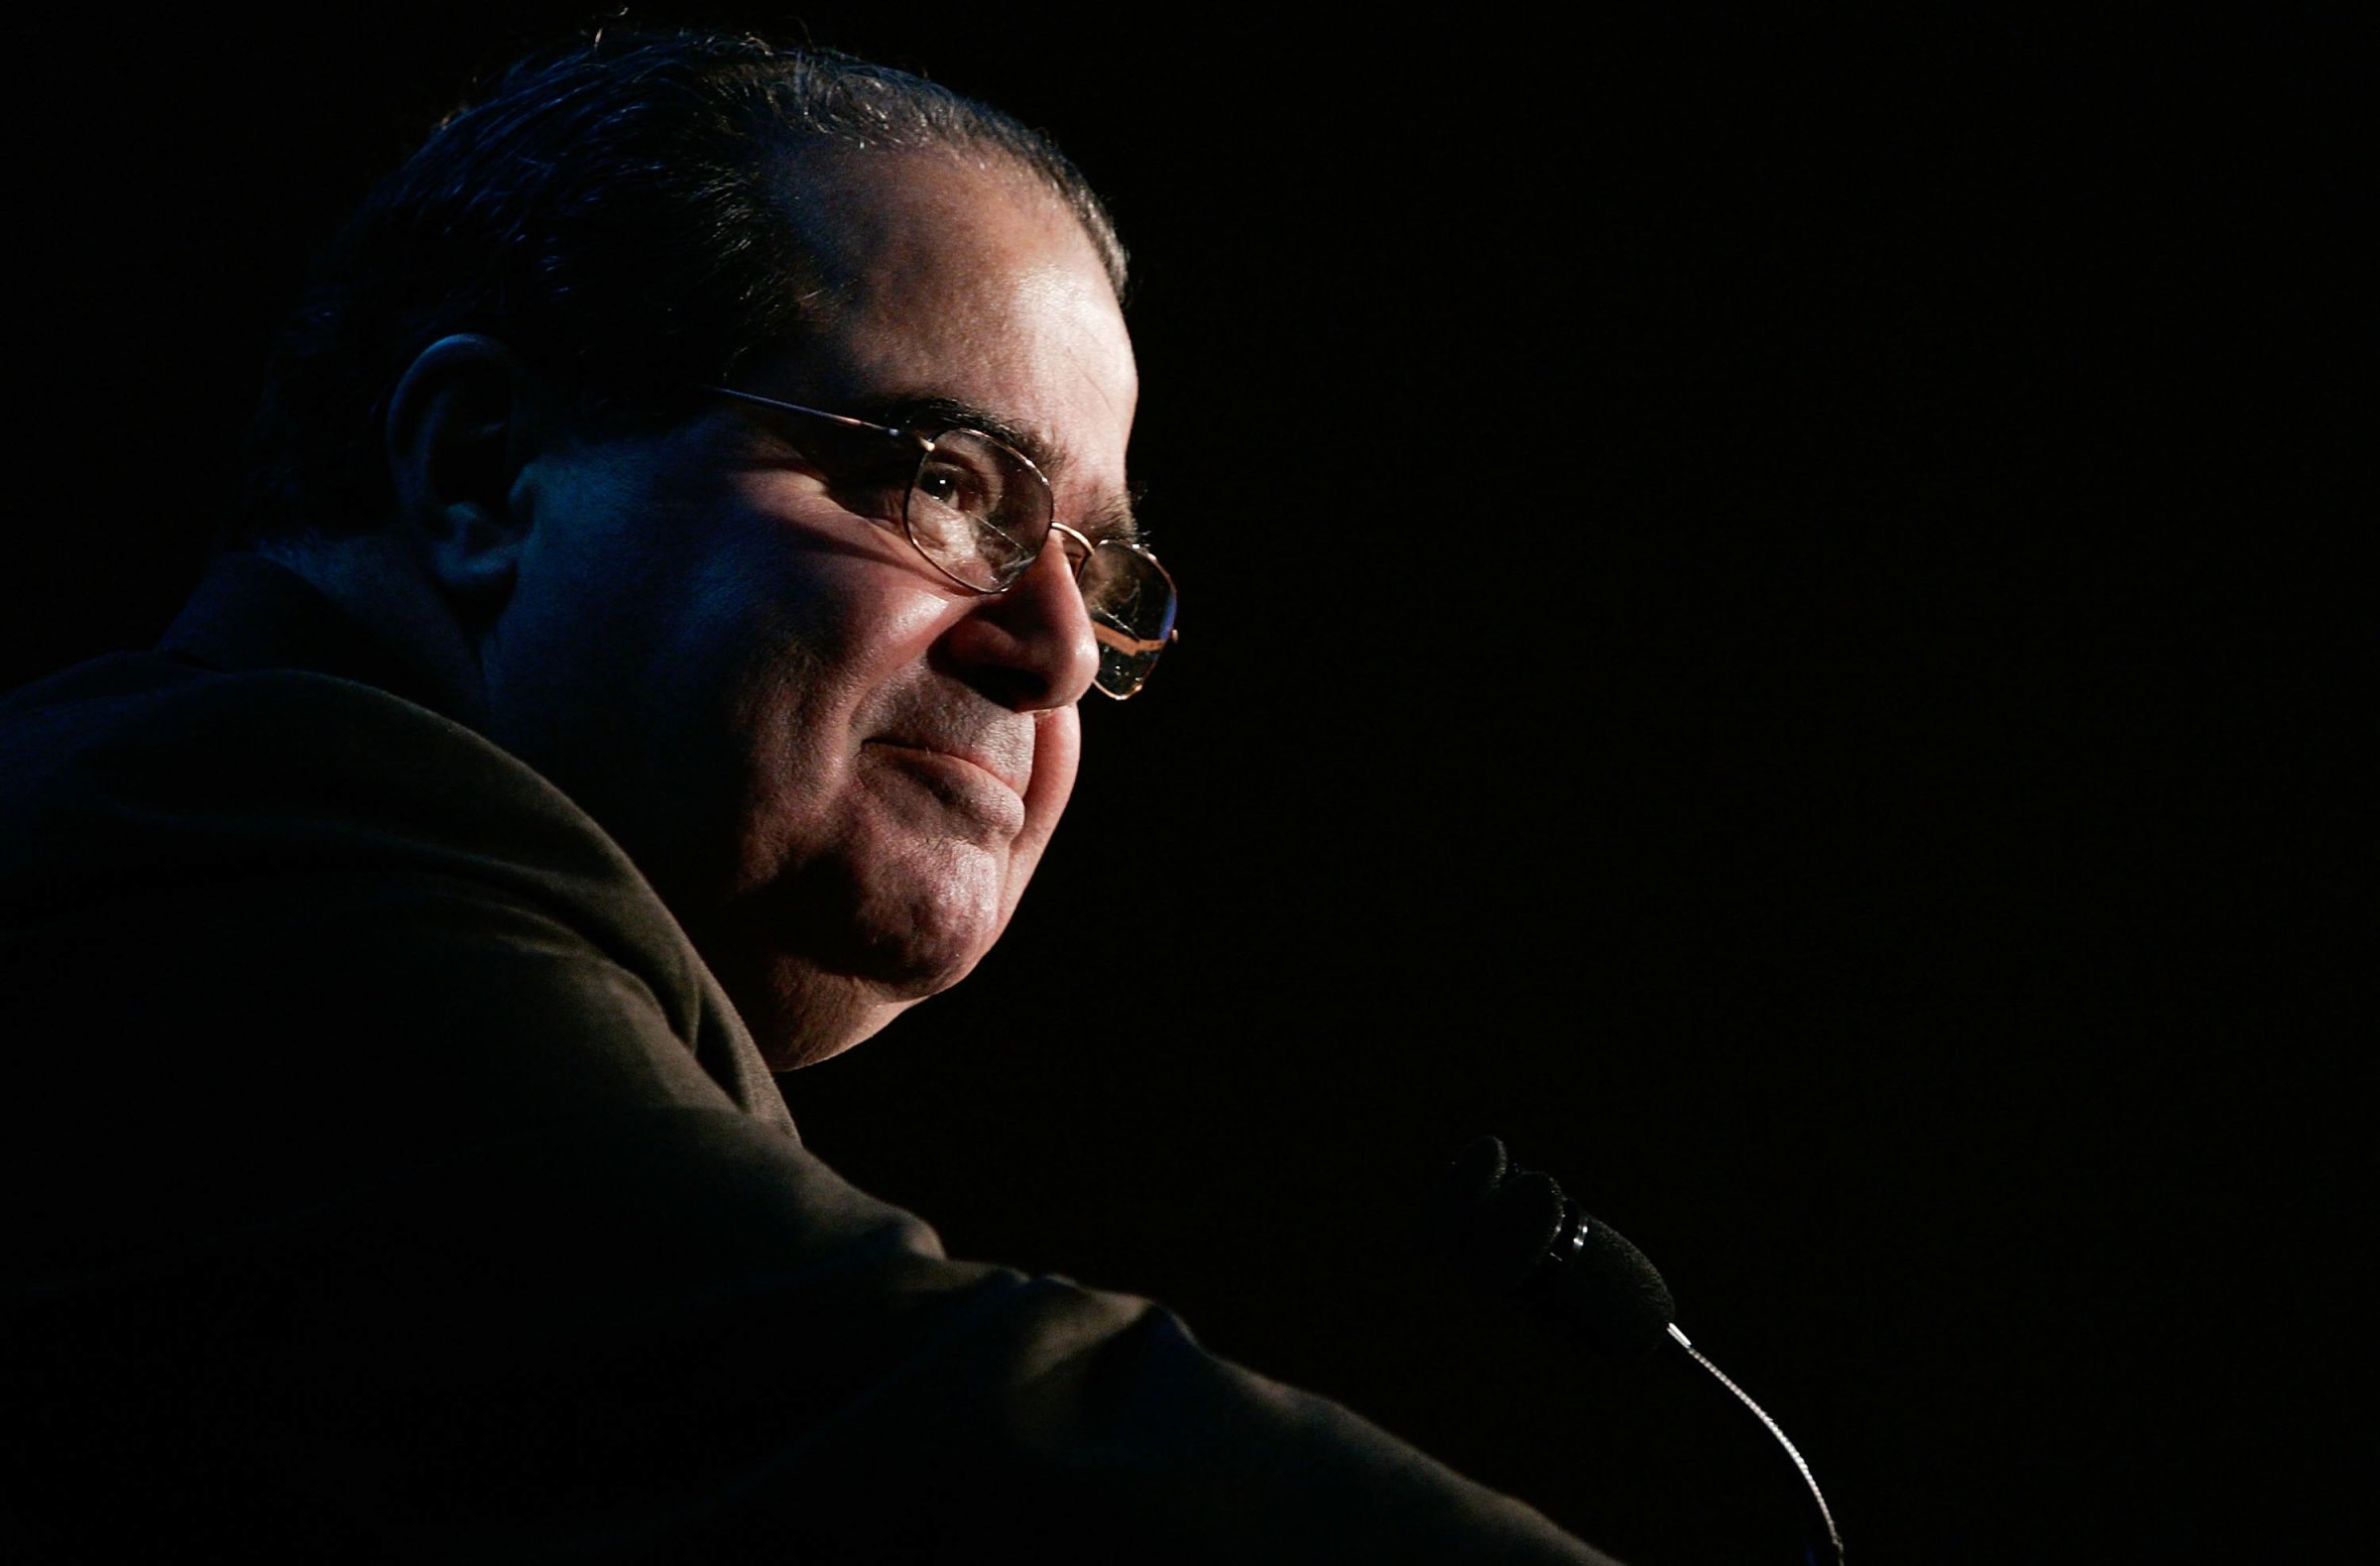 This Dec. 13, 2006 photo shows Supreme Court Associate Justice Antonin Scalia during an address at a Northern Virginia Technology Council (NVTC) breakfast in McLean, Va.